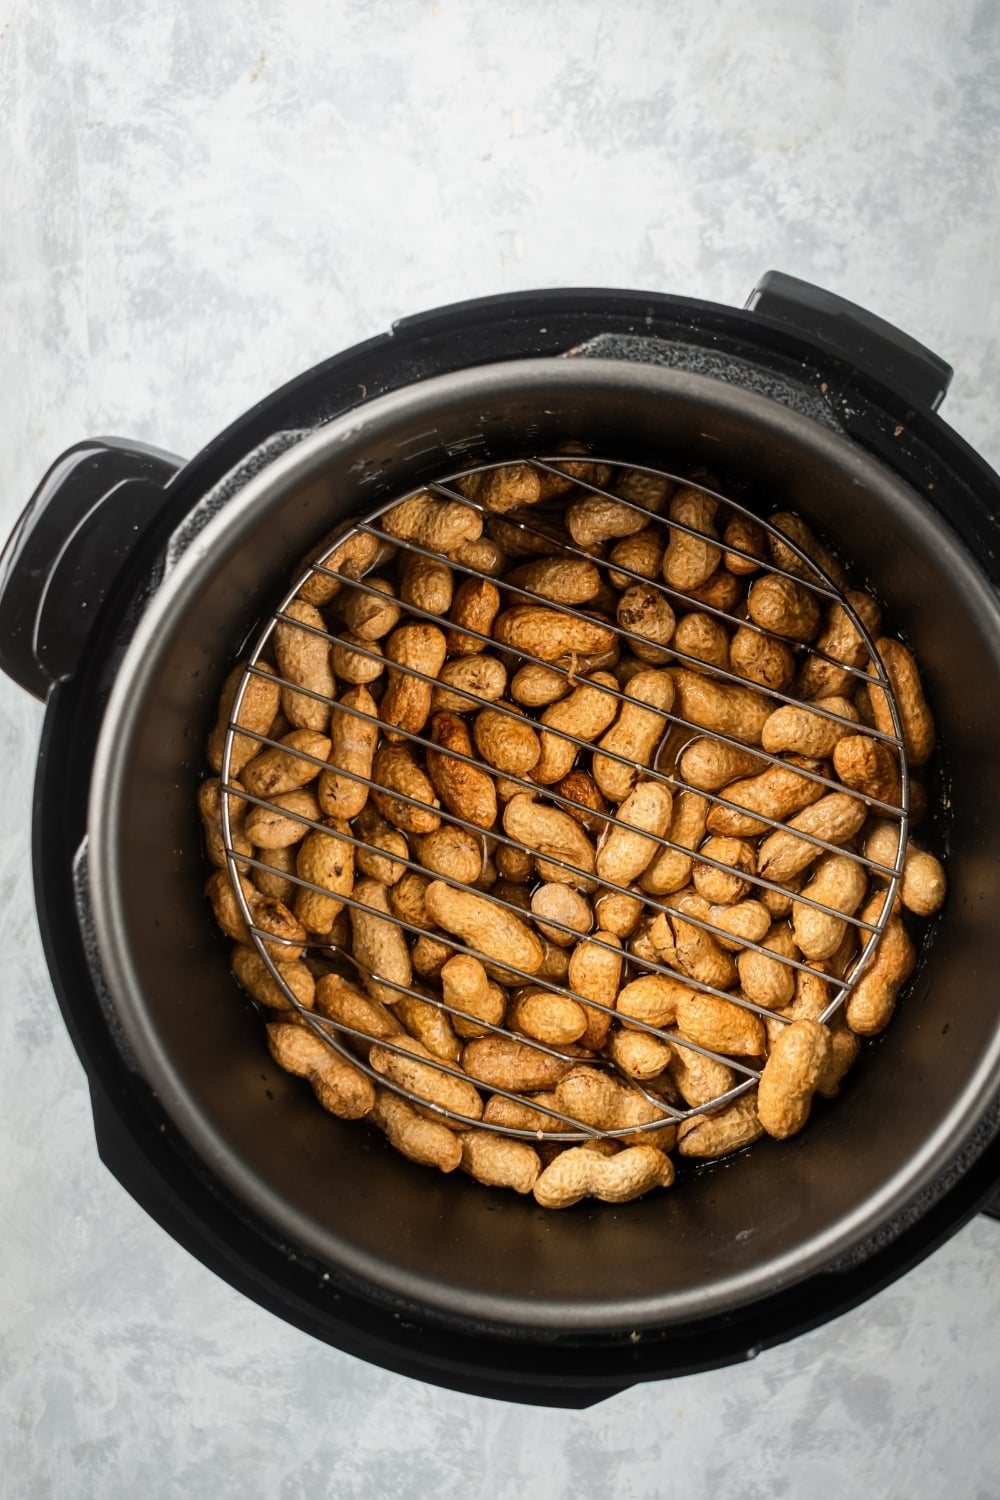 How To Boil Peanuts In An Electric Pressure Cooker